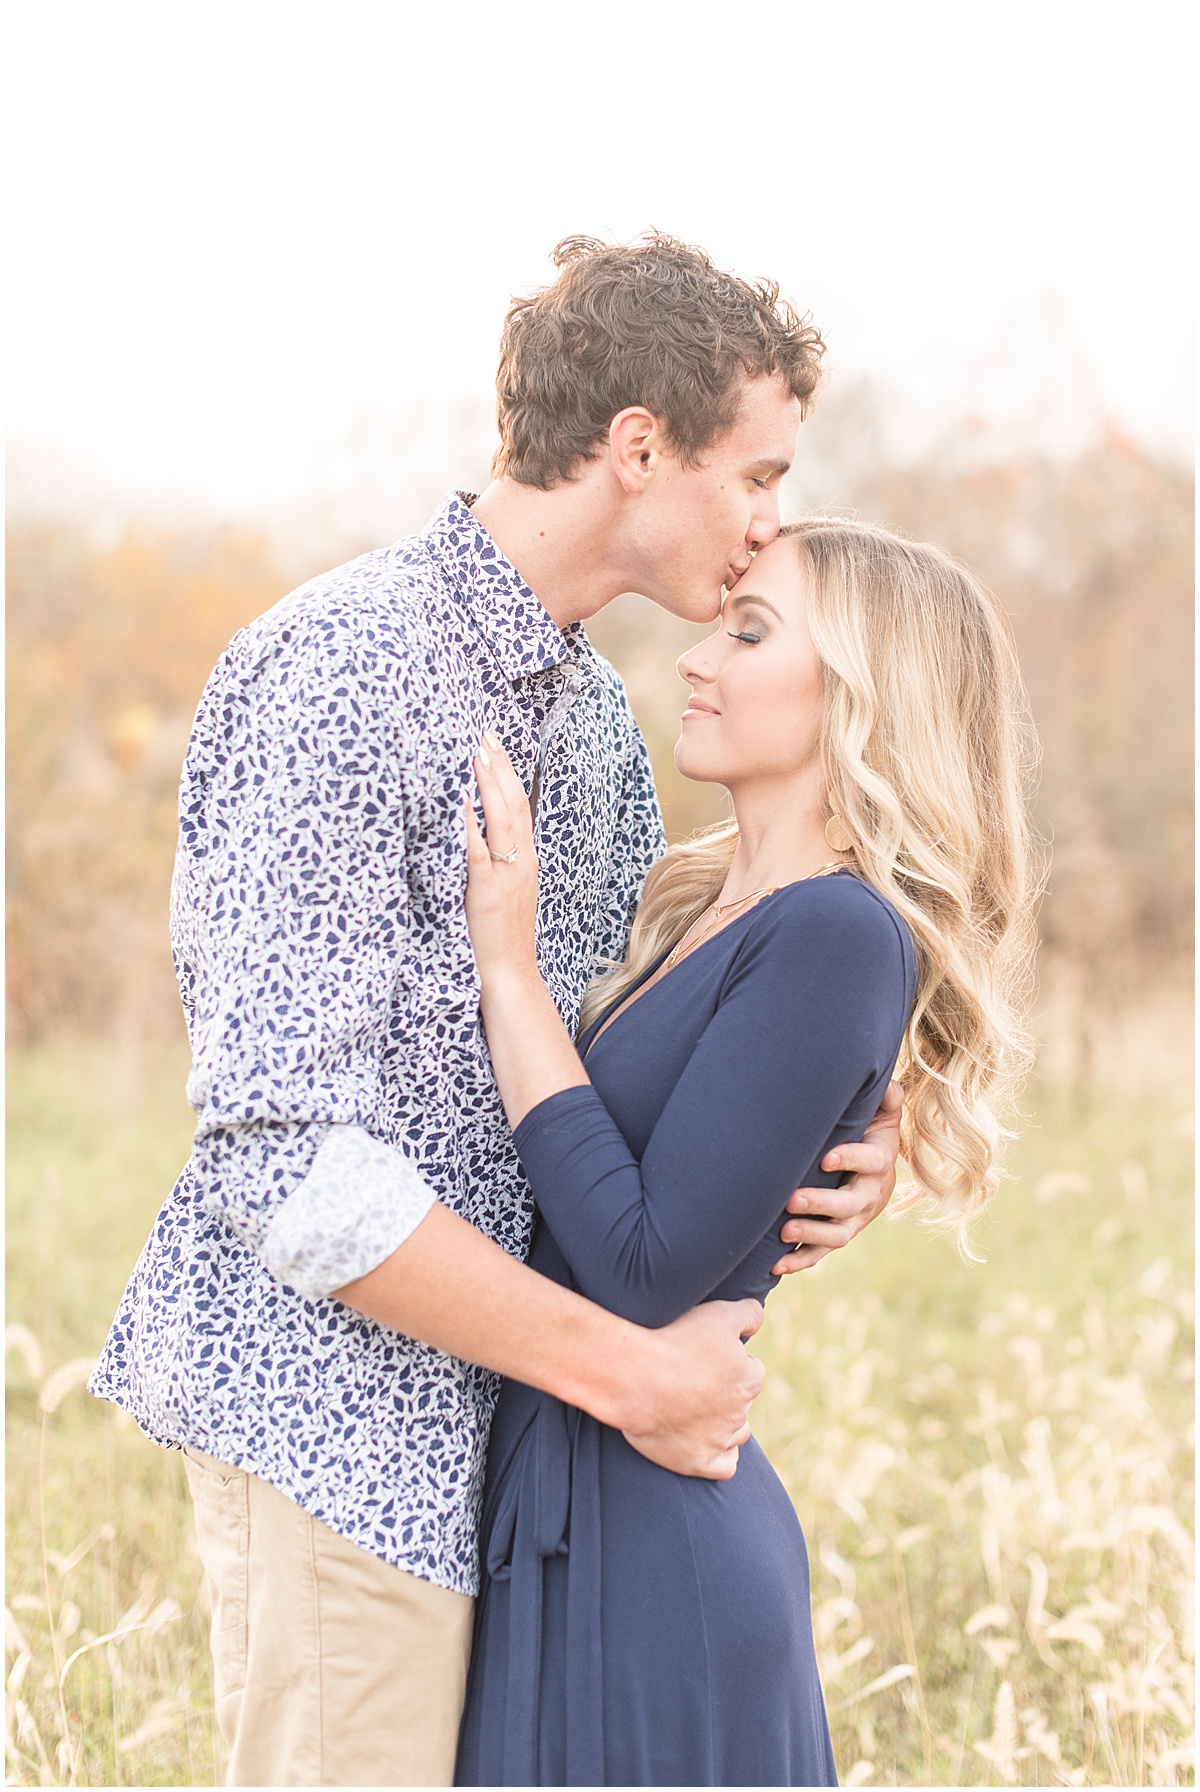 Wyatt Willson and Kaelyn Shircliff engagement session at Fairfield Lakes Park in Lafayette Indiana 34.jpg